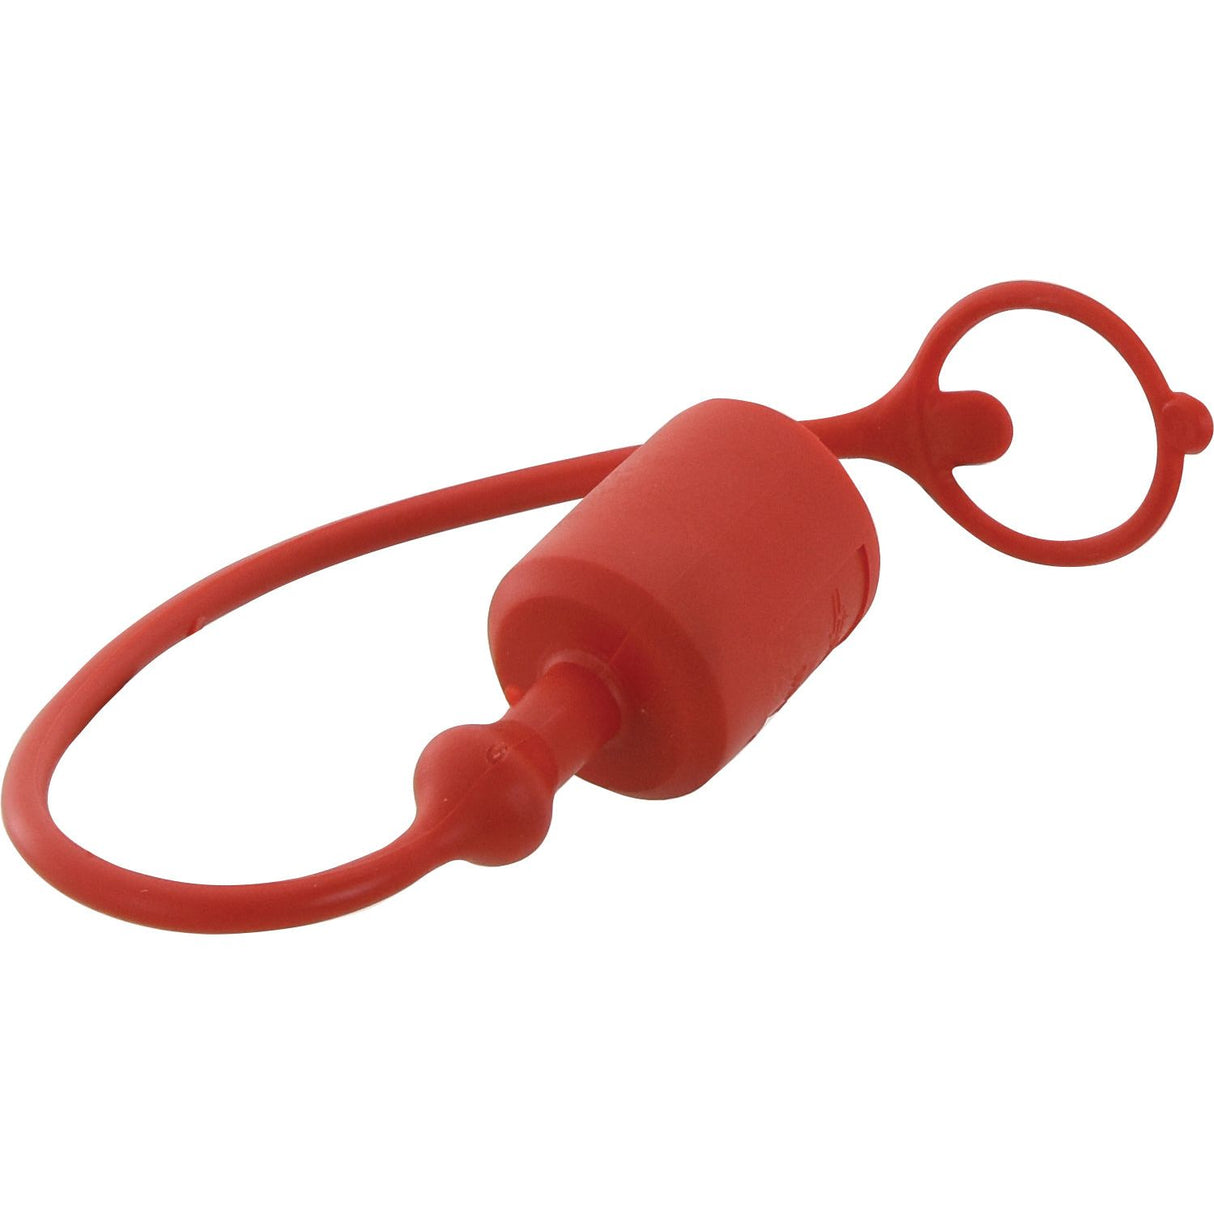 Dust Cap Red PVC Fits 3/4'' Male Coupling - TFH Series TFH 34
 - S.112772 - Farming Parts